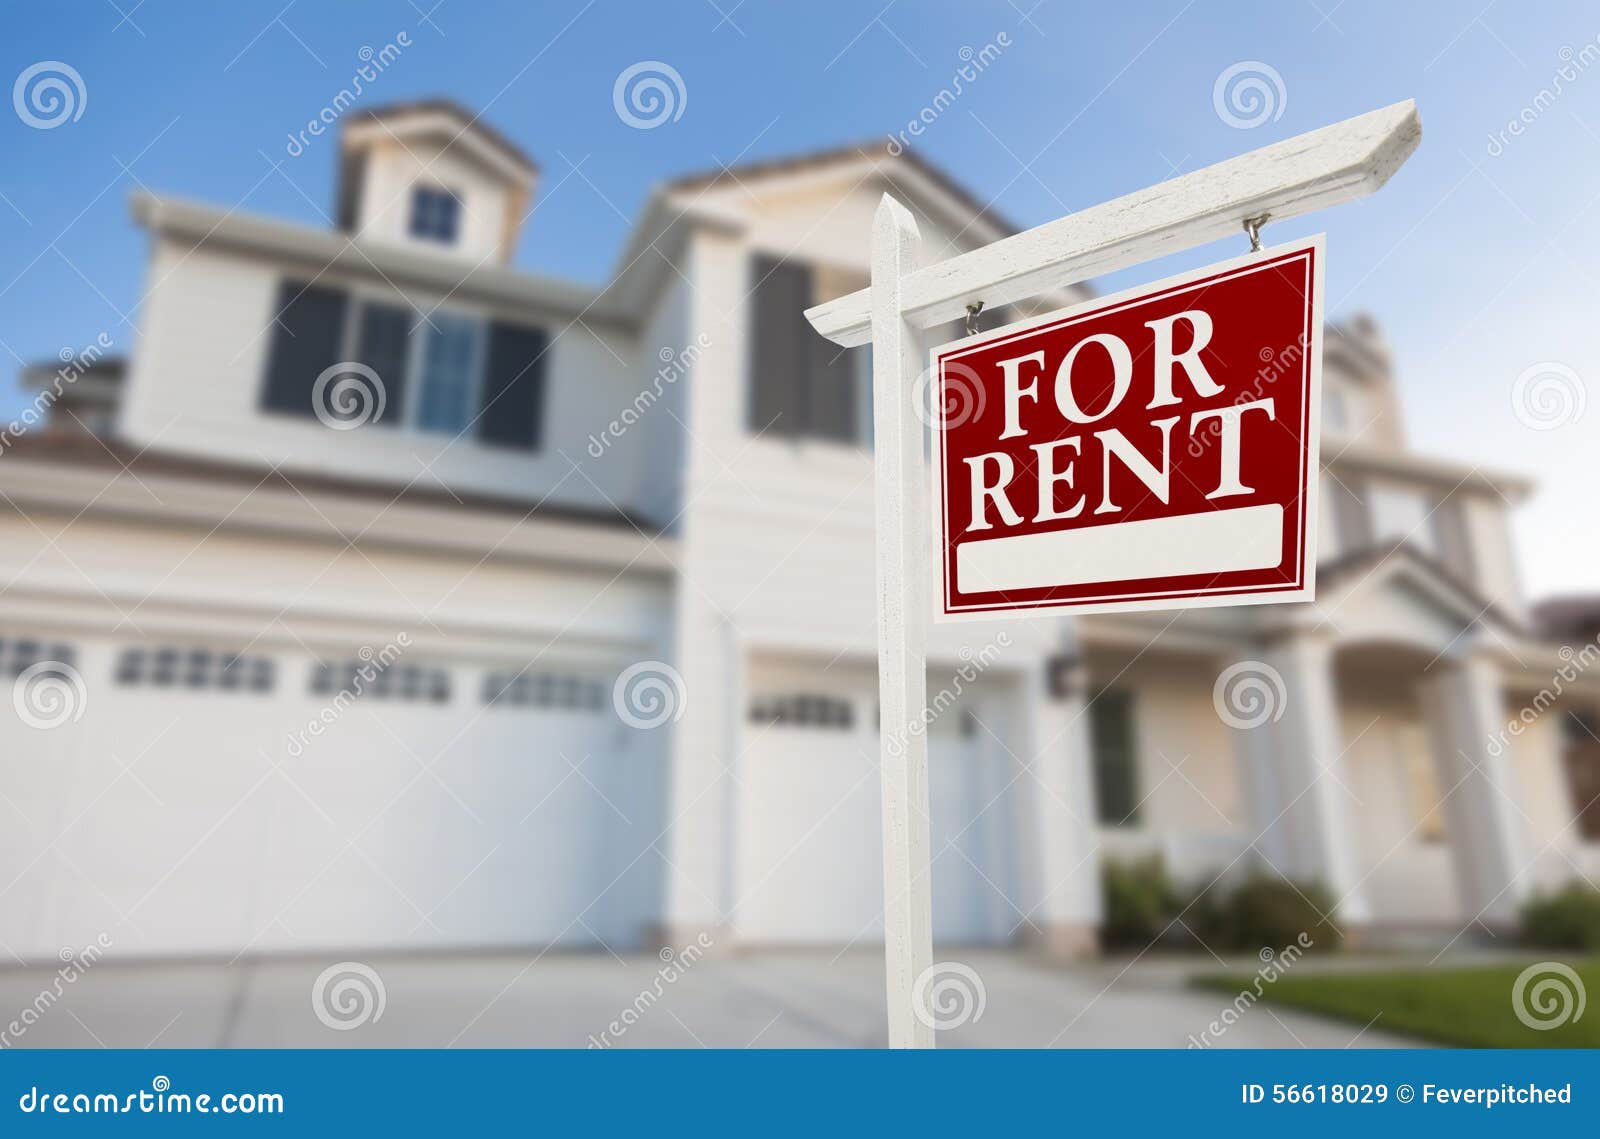 for rent real estate sign in front of house